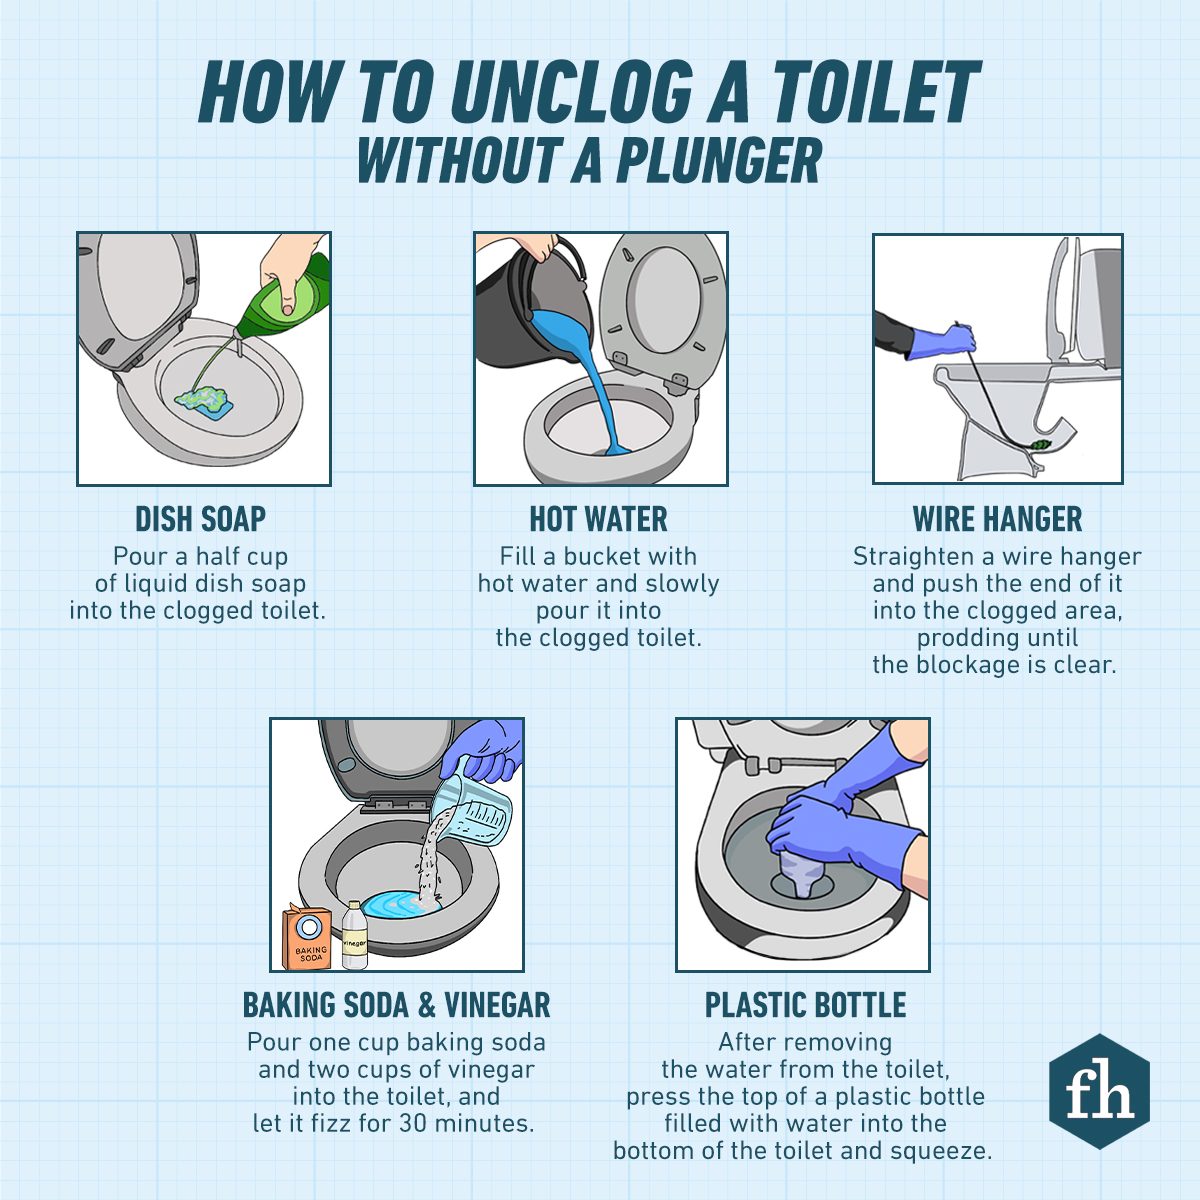 How To Unclog A Toilet Without A Plunger Graphic